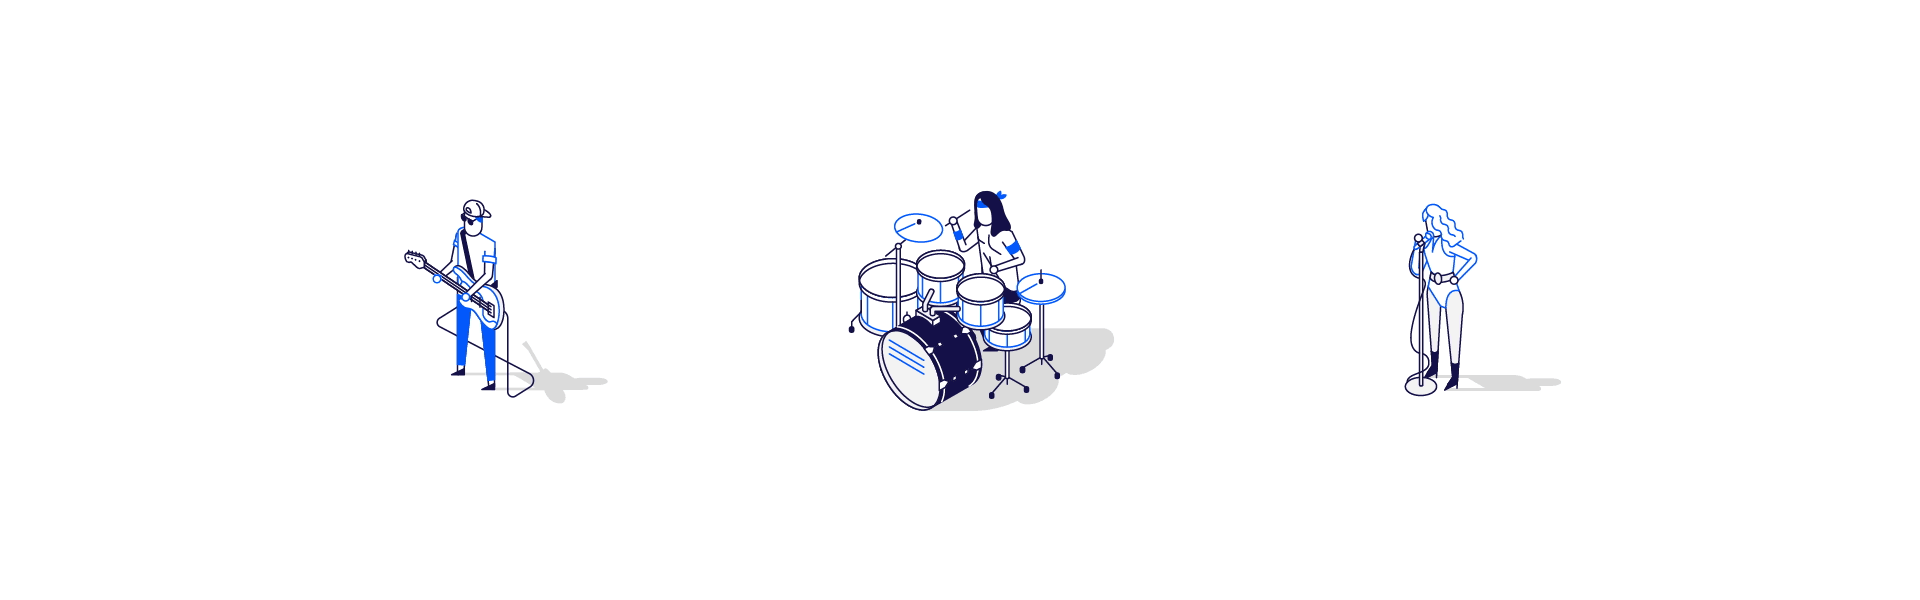 Animations in loop of a rock band with a bass player, a drummer and a woman vocalist